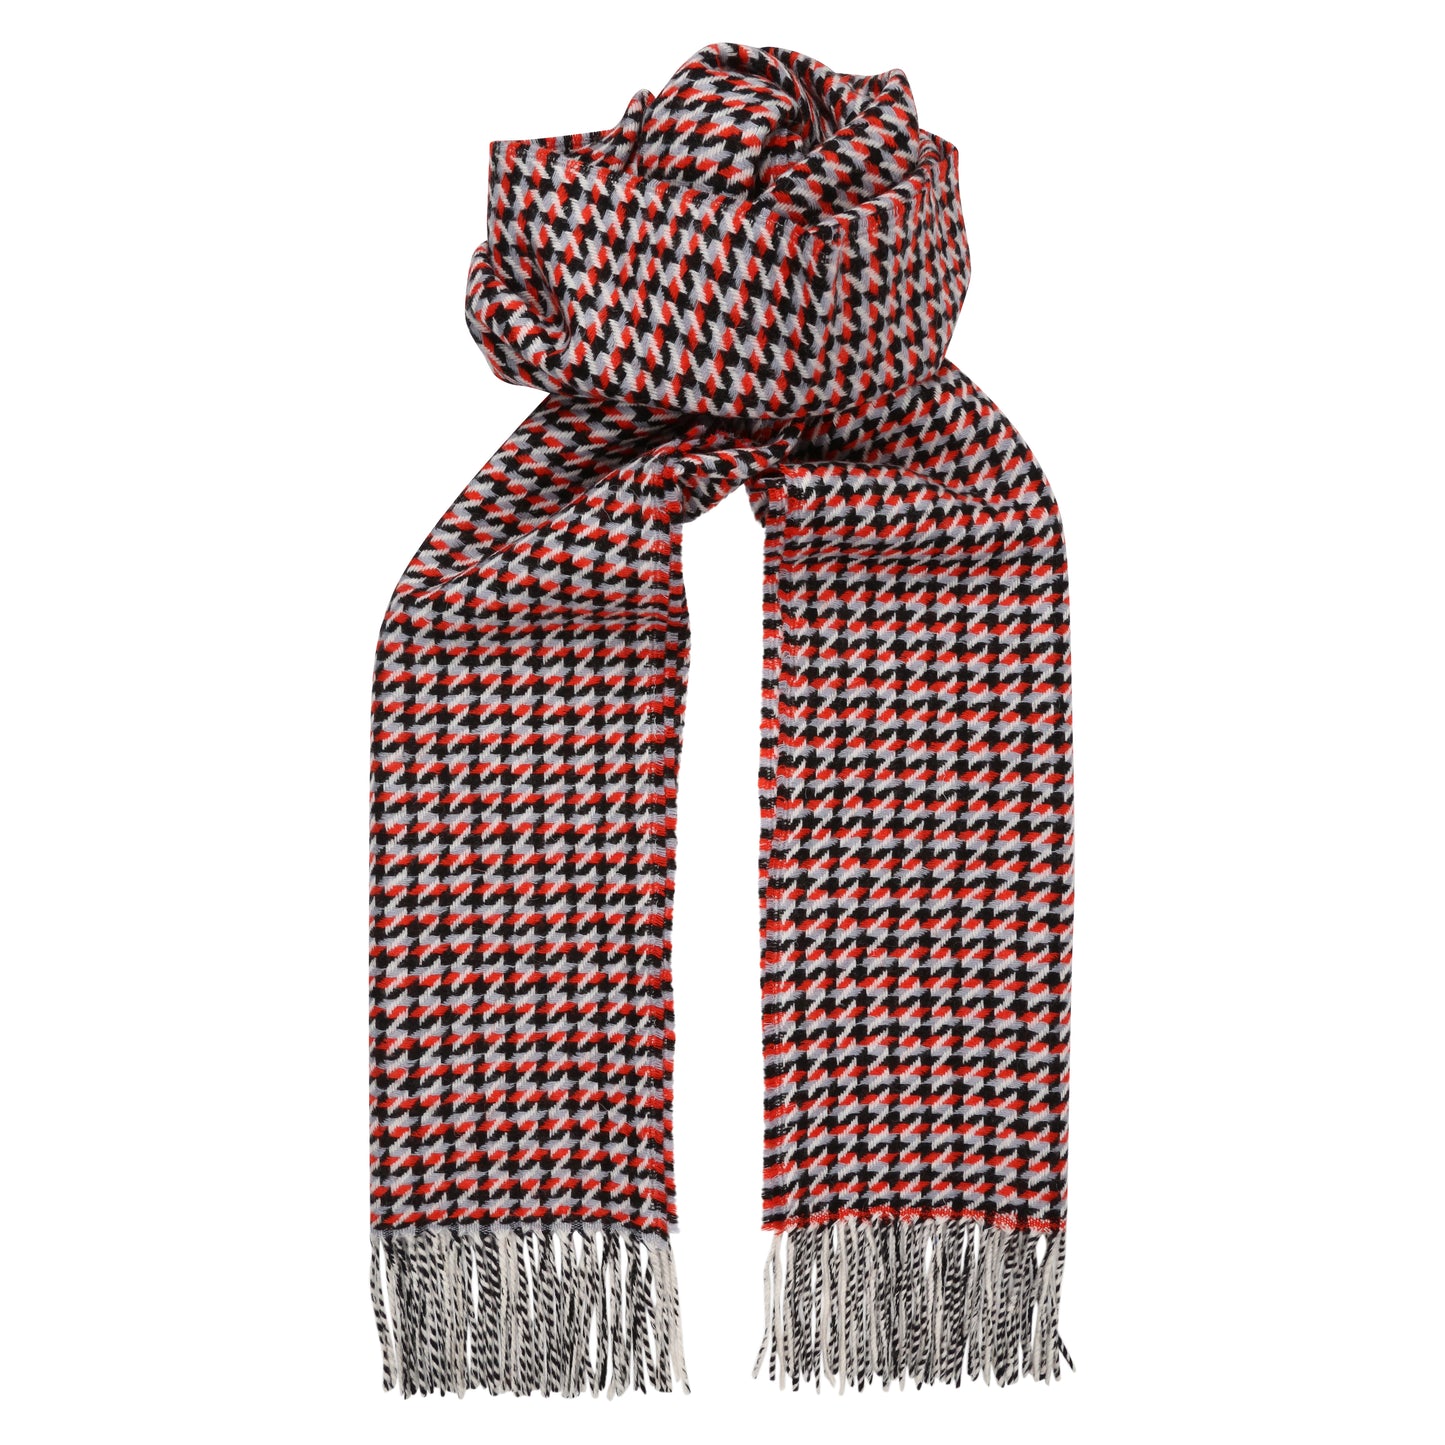 Dogtooth Check 100% Lambswool Long Warm Winter Stole Scarf